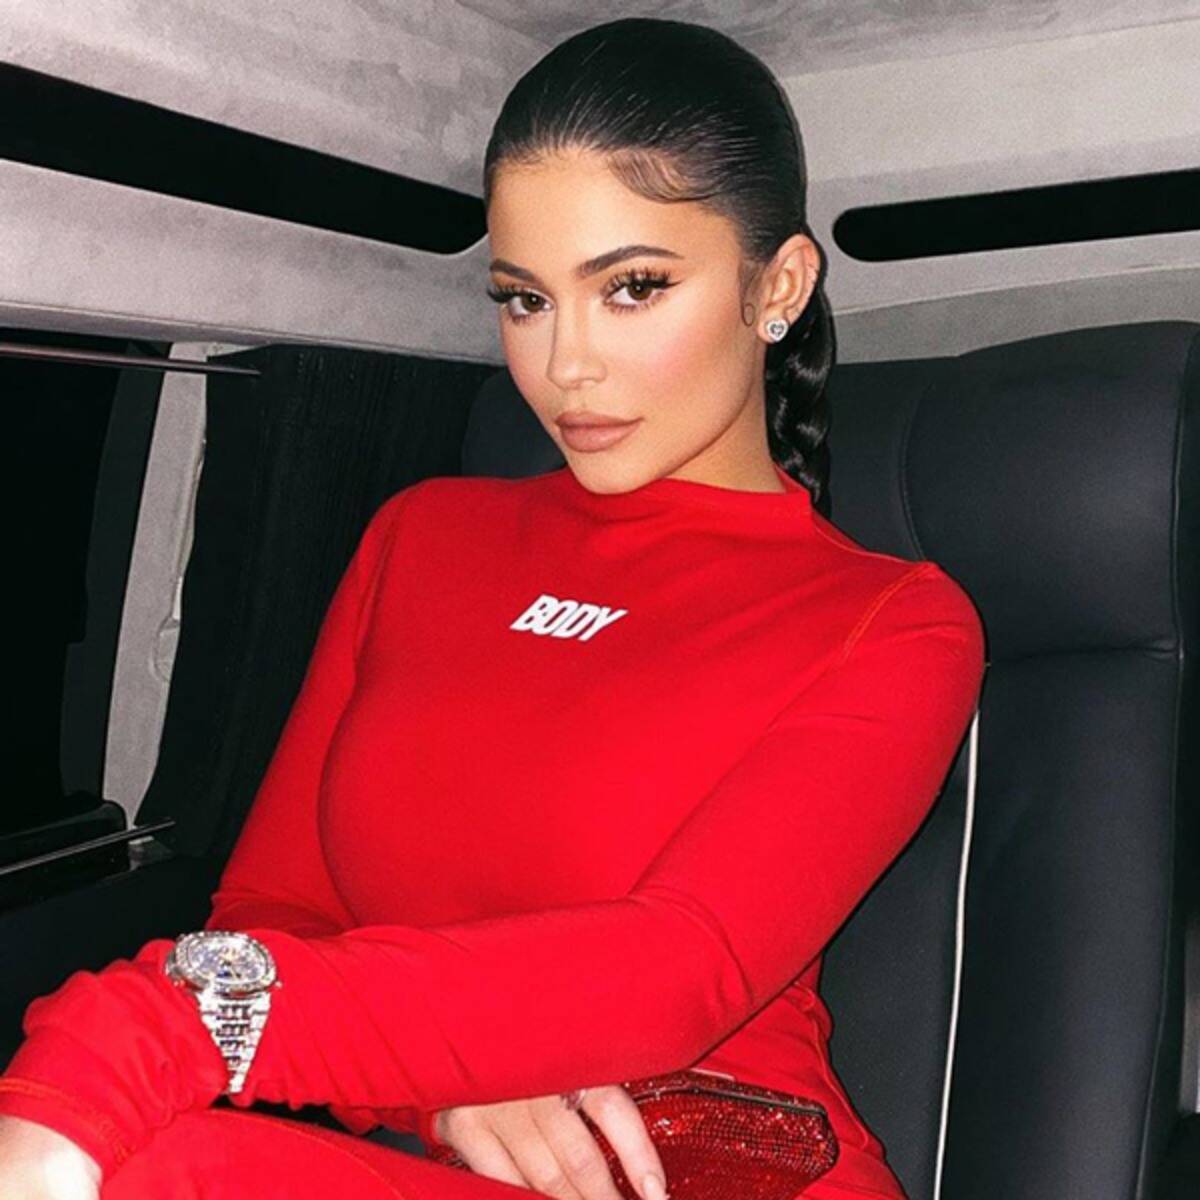 ”kuwk-kylie-jenner-reportedly-wants-everyone-to-stop-focusing-on-her-money-after-forbes-accuses-her-of-lying-about-being-a-billionaire”